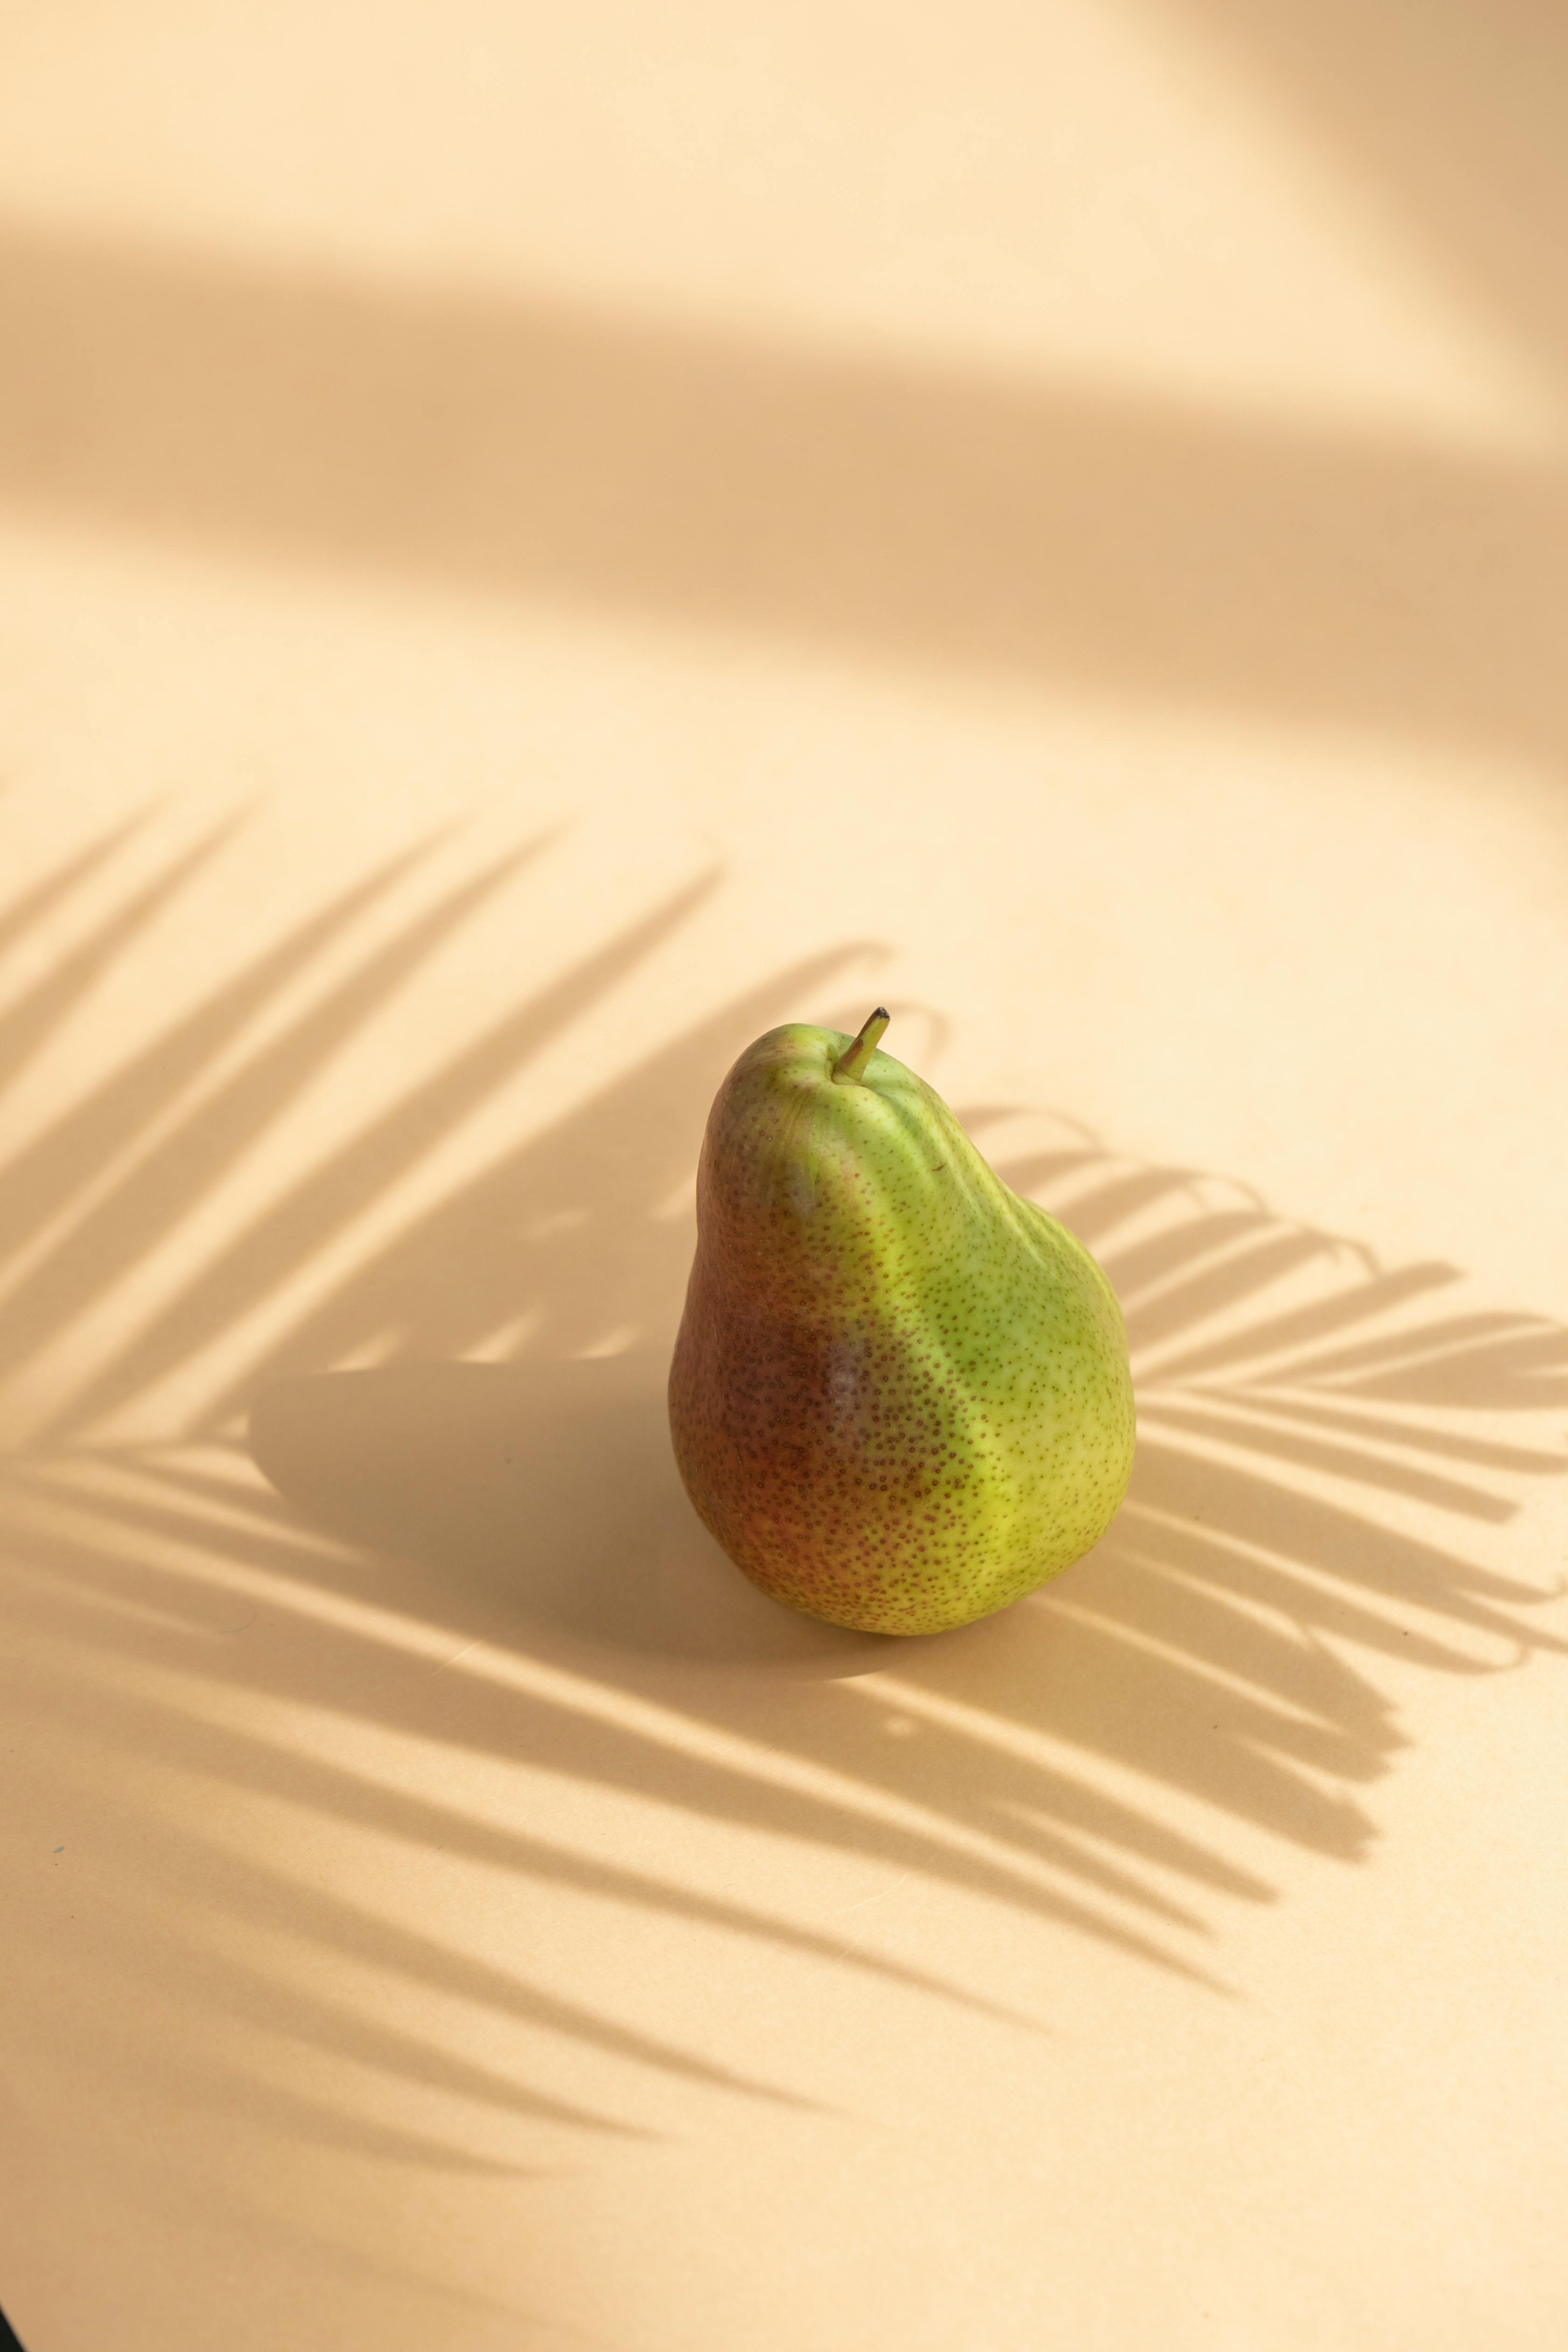 ripe green and red fruit pear on white surface under palm branch